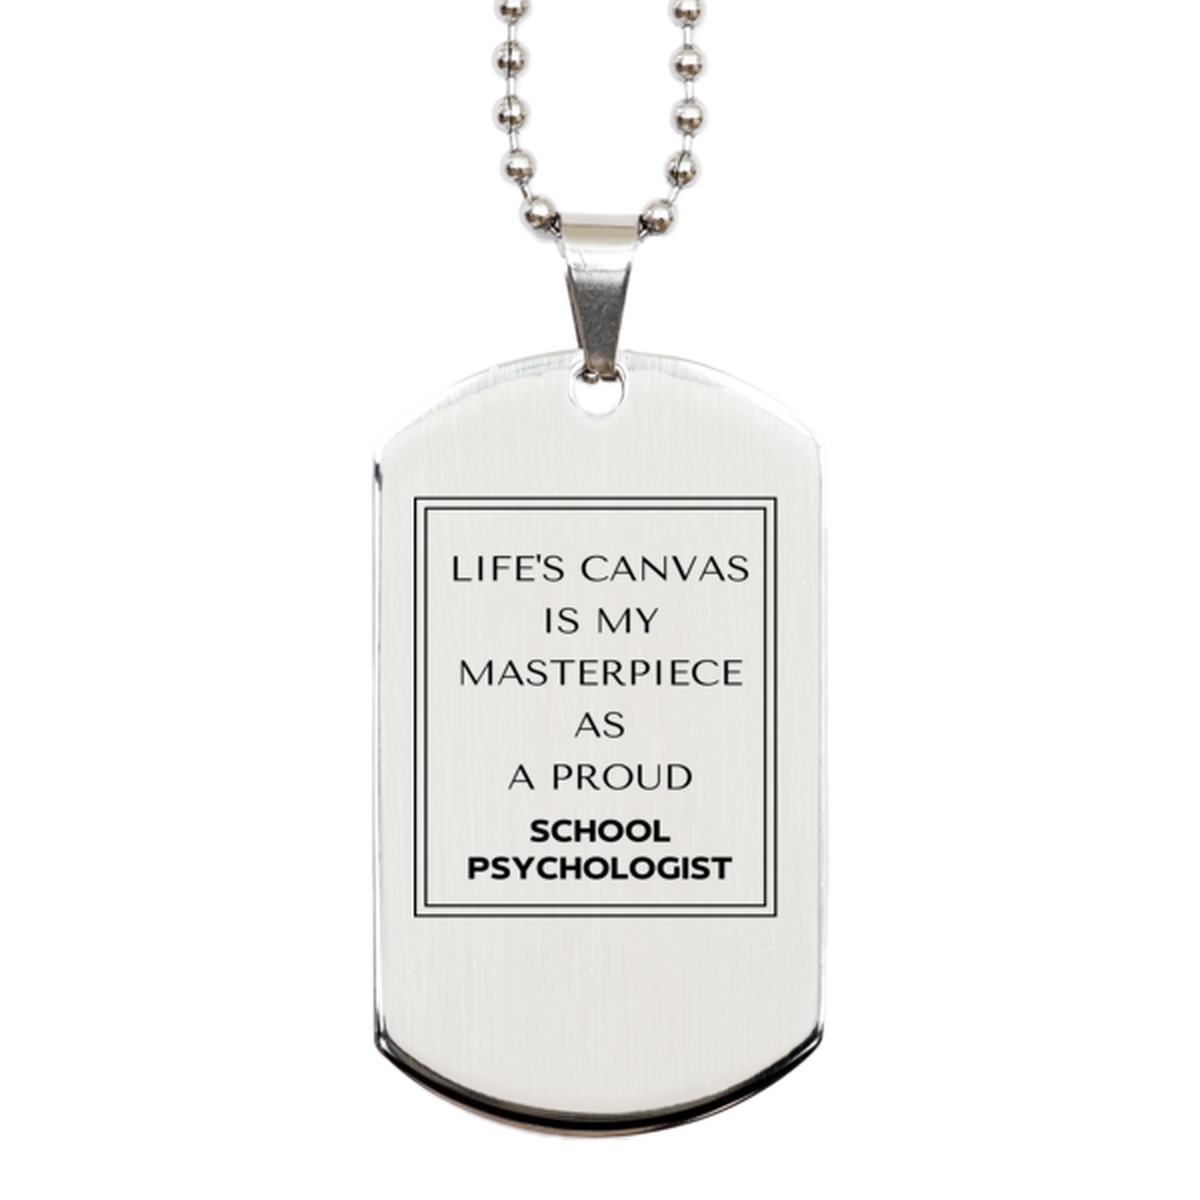 Proud School Psychologist Gifts, Life's canvas is my masterpiece, Epic Birthday Christmas Unique Silver Dog Tag For School Psychologist, Coworkers, Men, Women, Friends